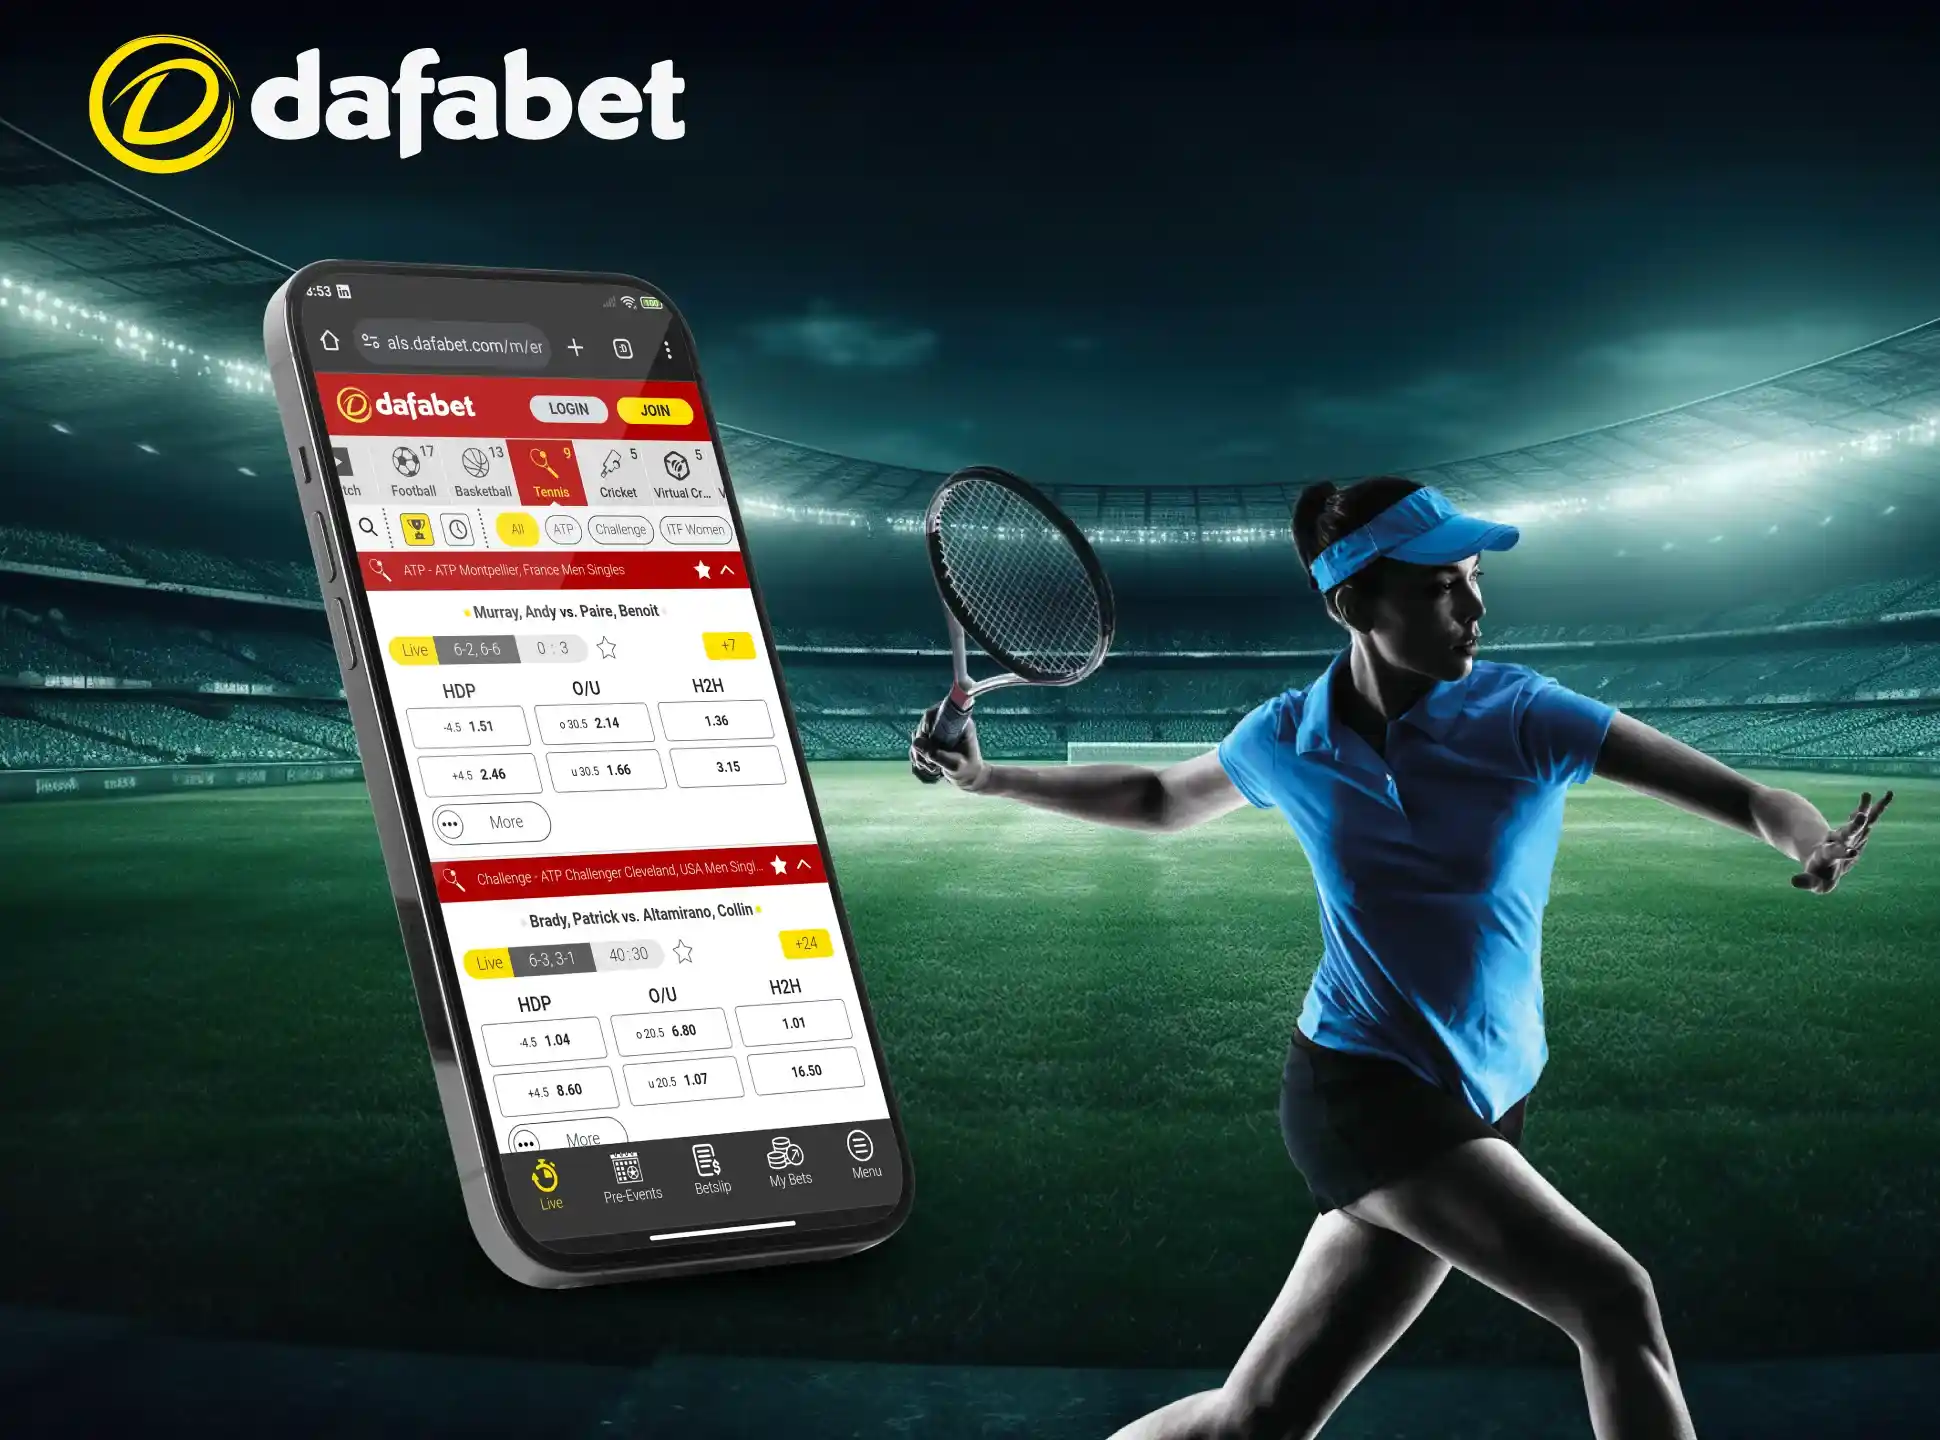 Tennis league betting is available on the Dafabet app.